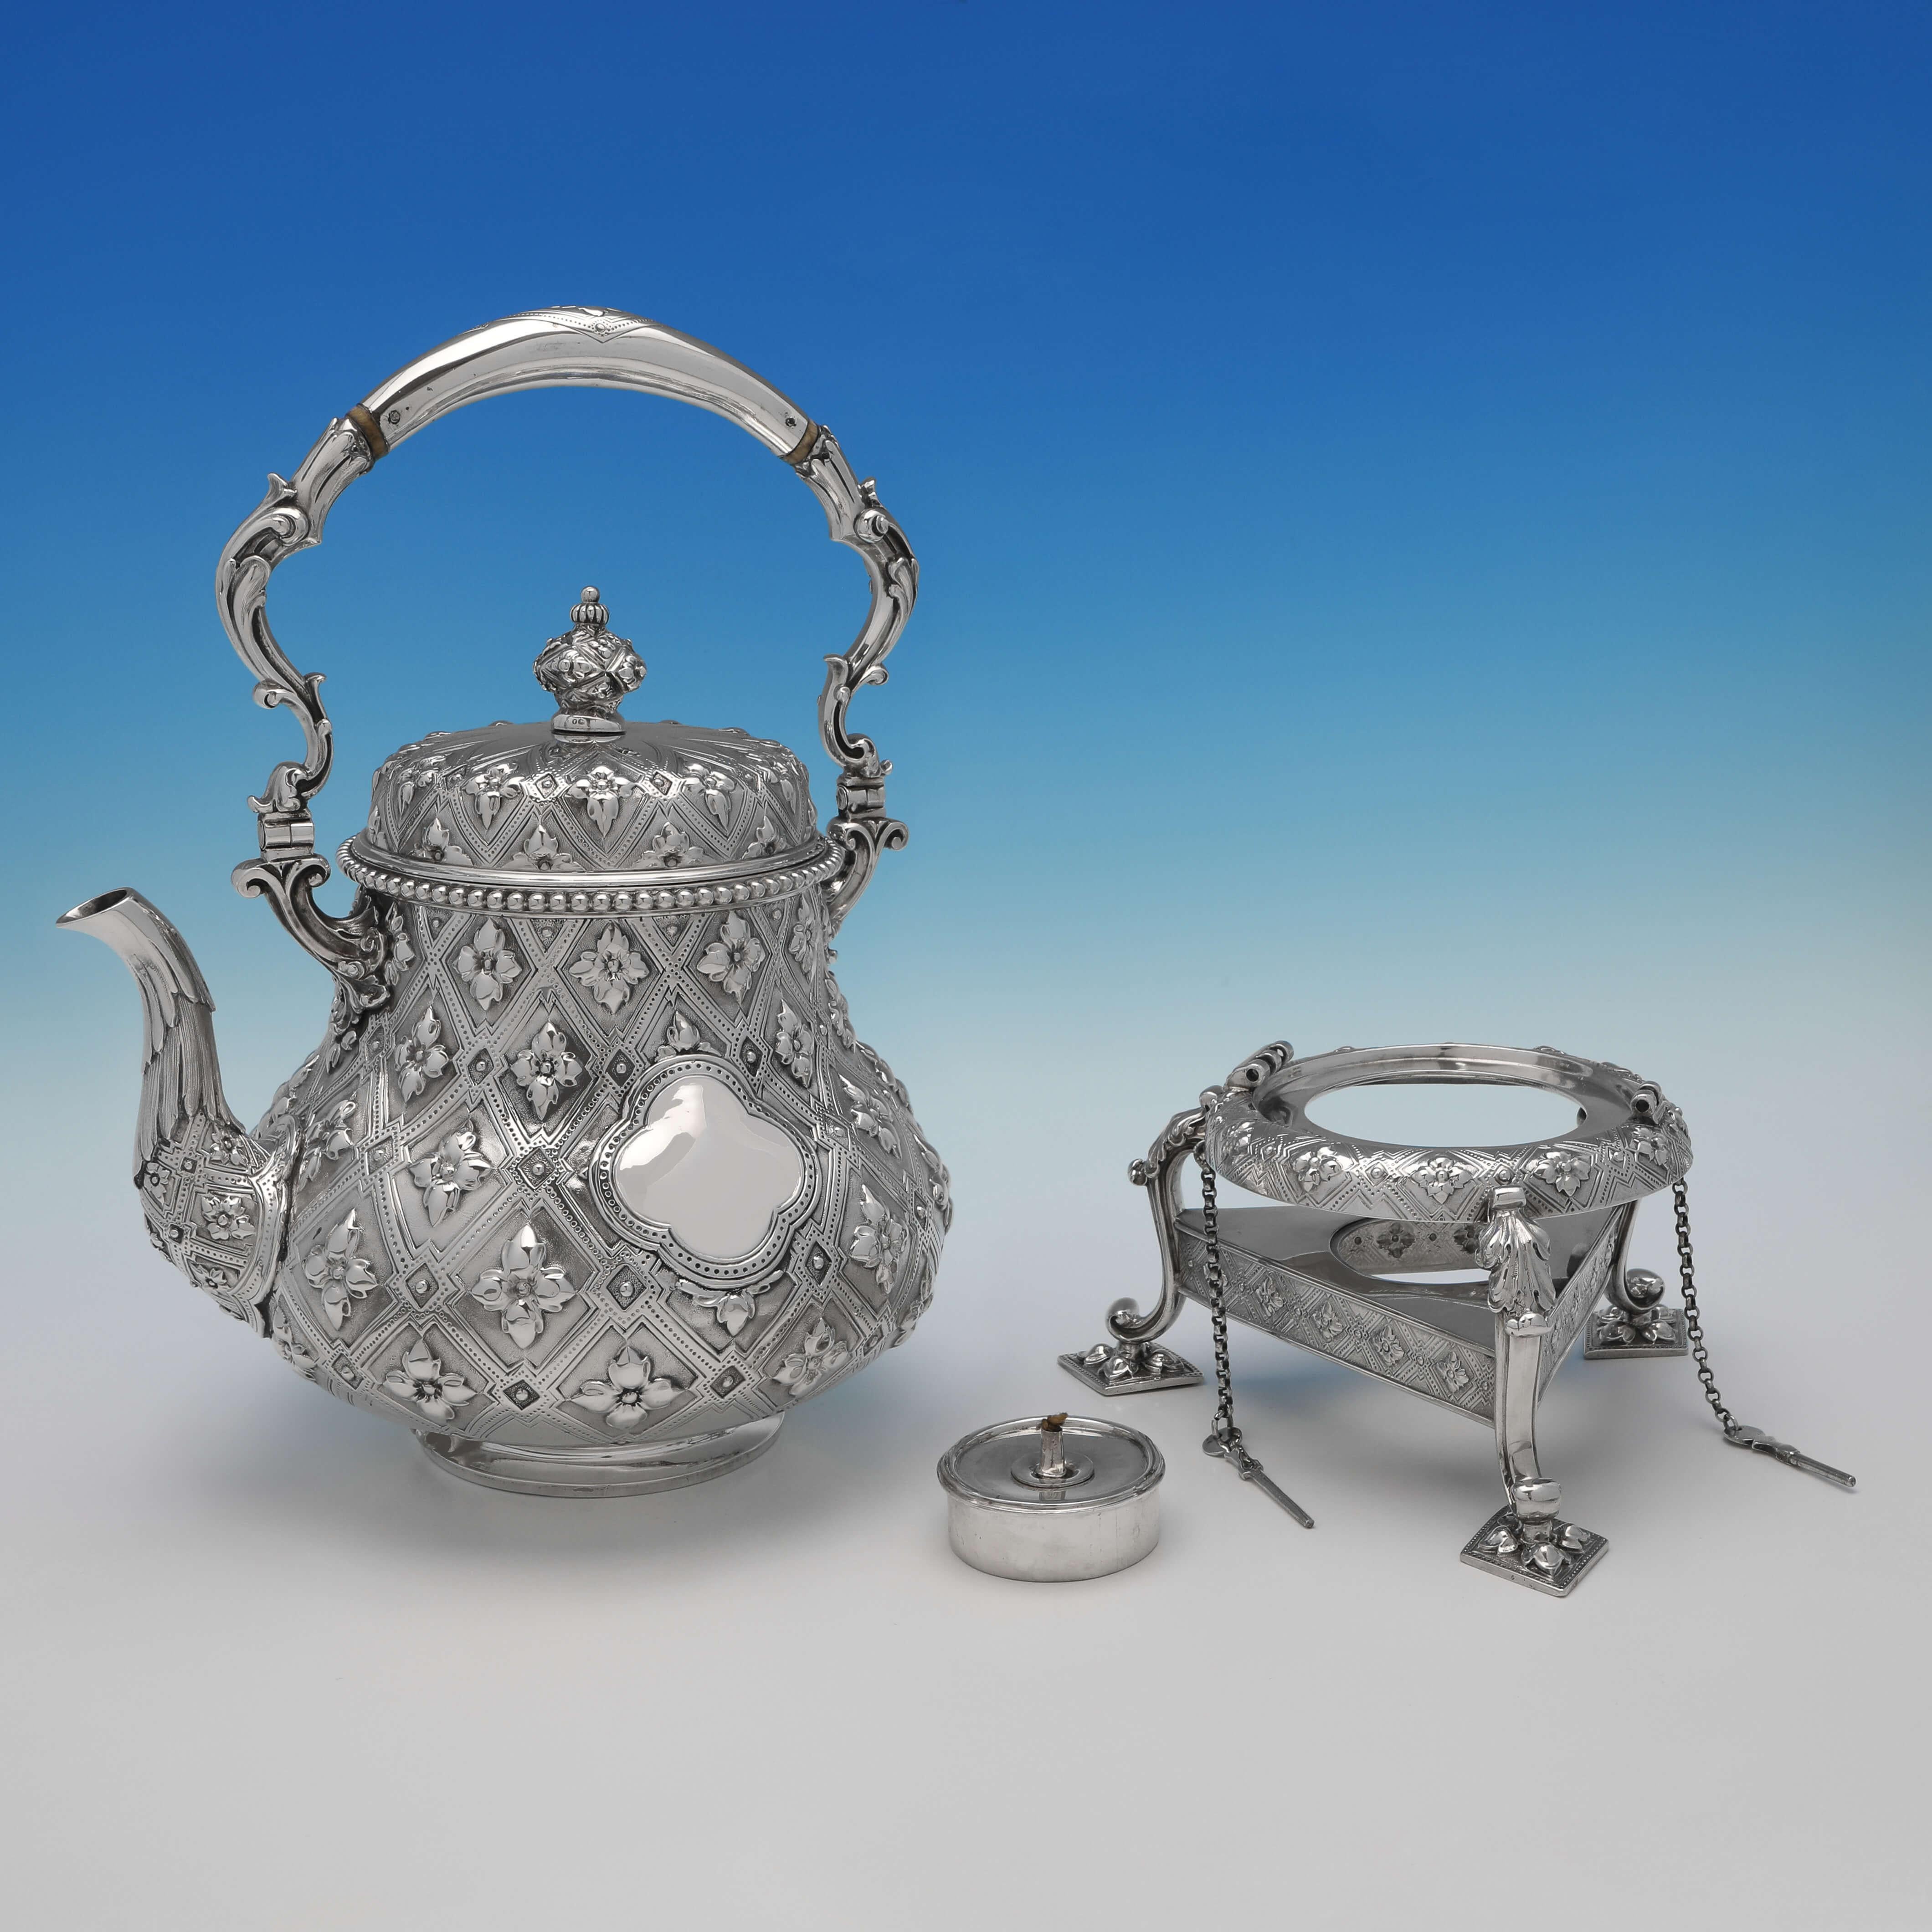 Hallmarked in London in 1861 and 1862 by Robert Hennell I, this striking, Victorian, Antique Sterling Silver Tea Set, includes a covered milk jug and a small cream jug, and features wonderfully ornate chasing throughout, and silver handles. The